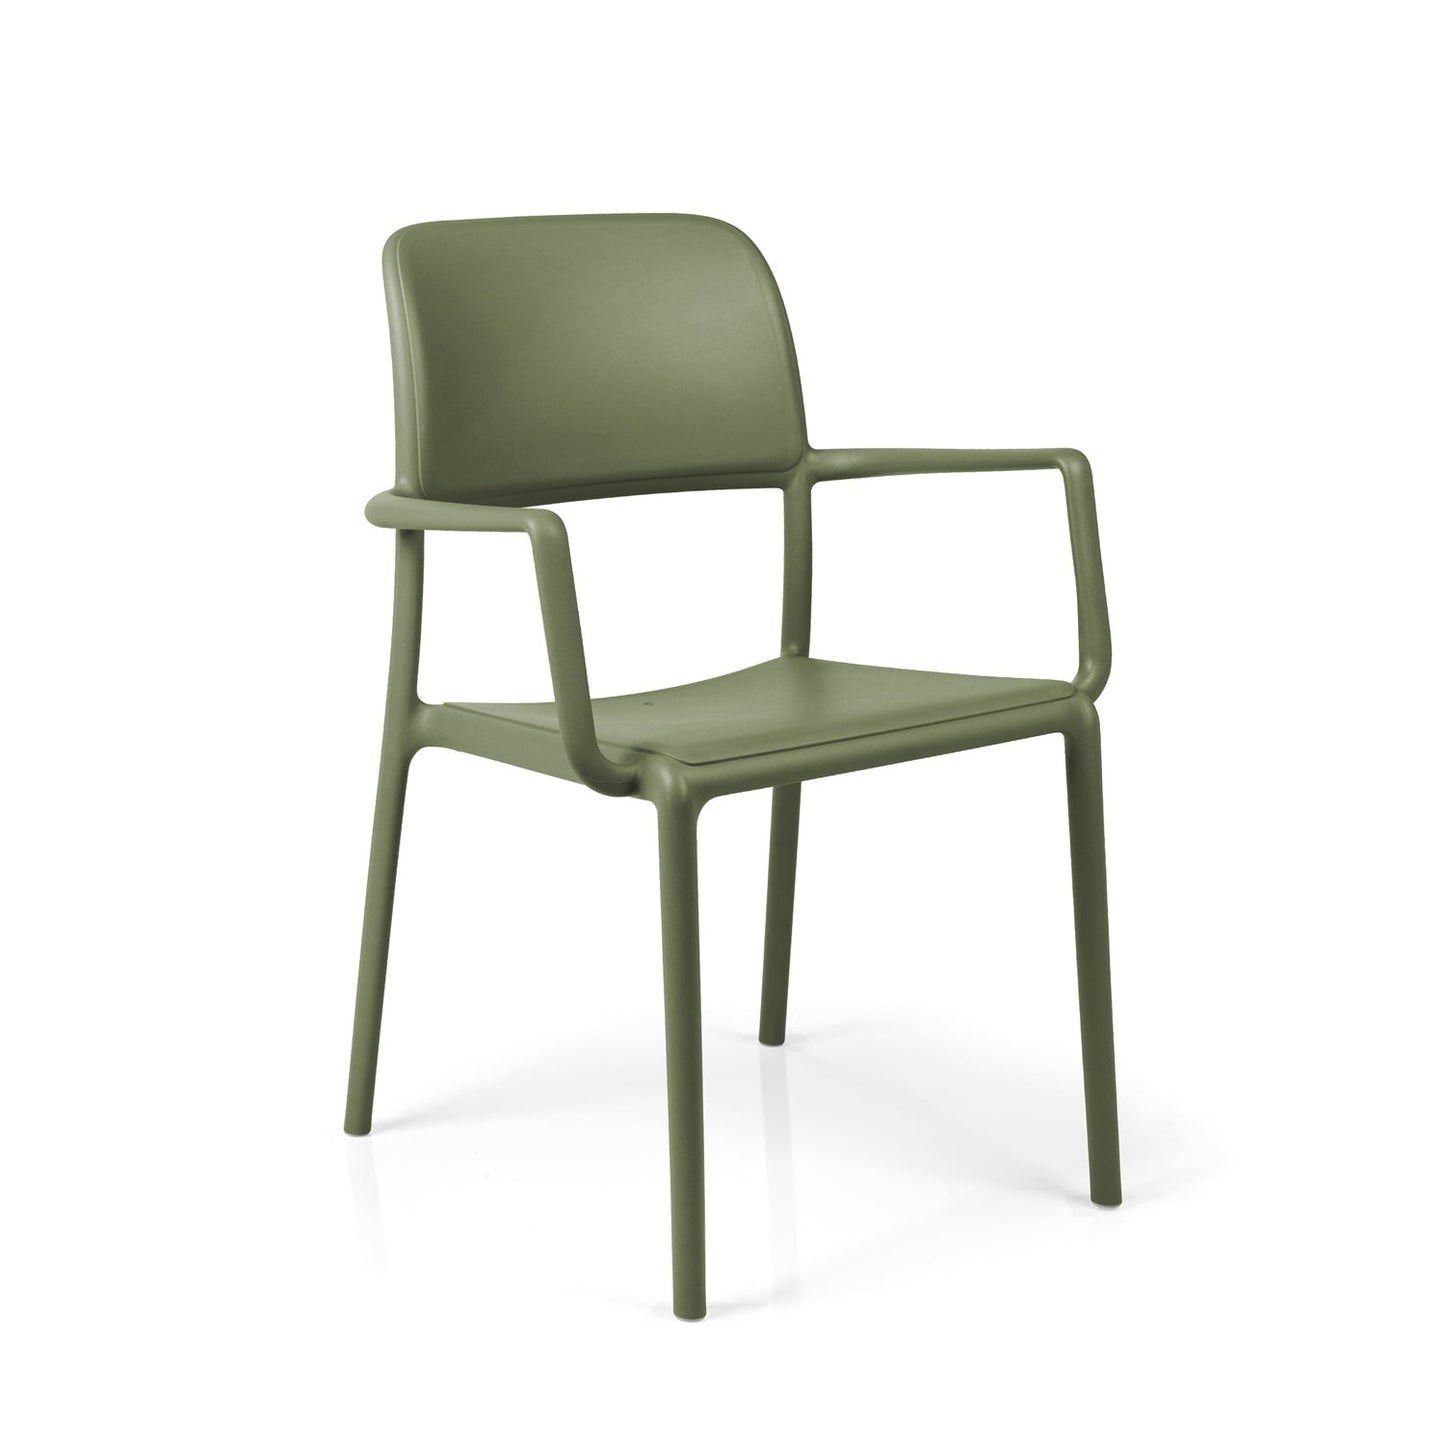 Riva Garden Chair By Nardi In Olive